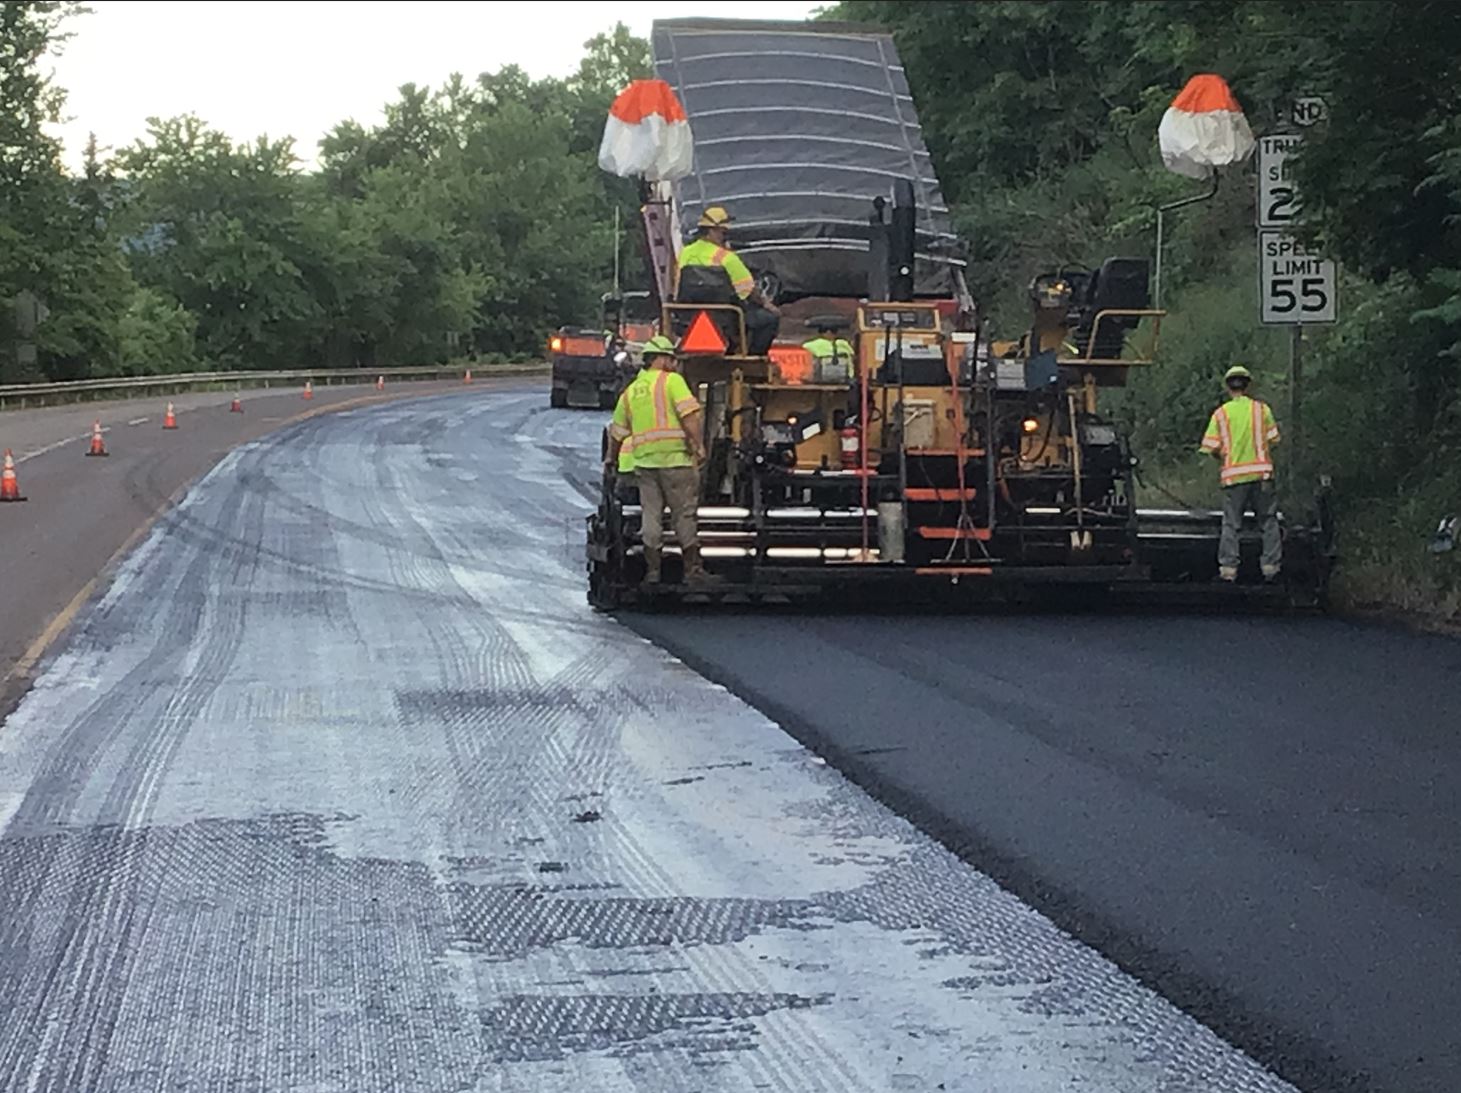 A large construction vehicle places and smoothes asphalt onto a milled roadway.